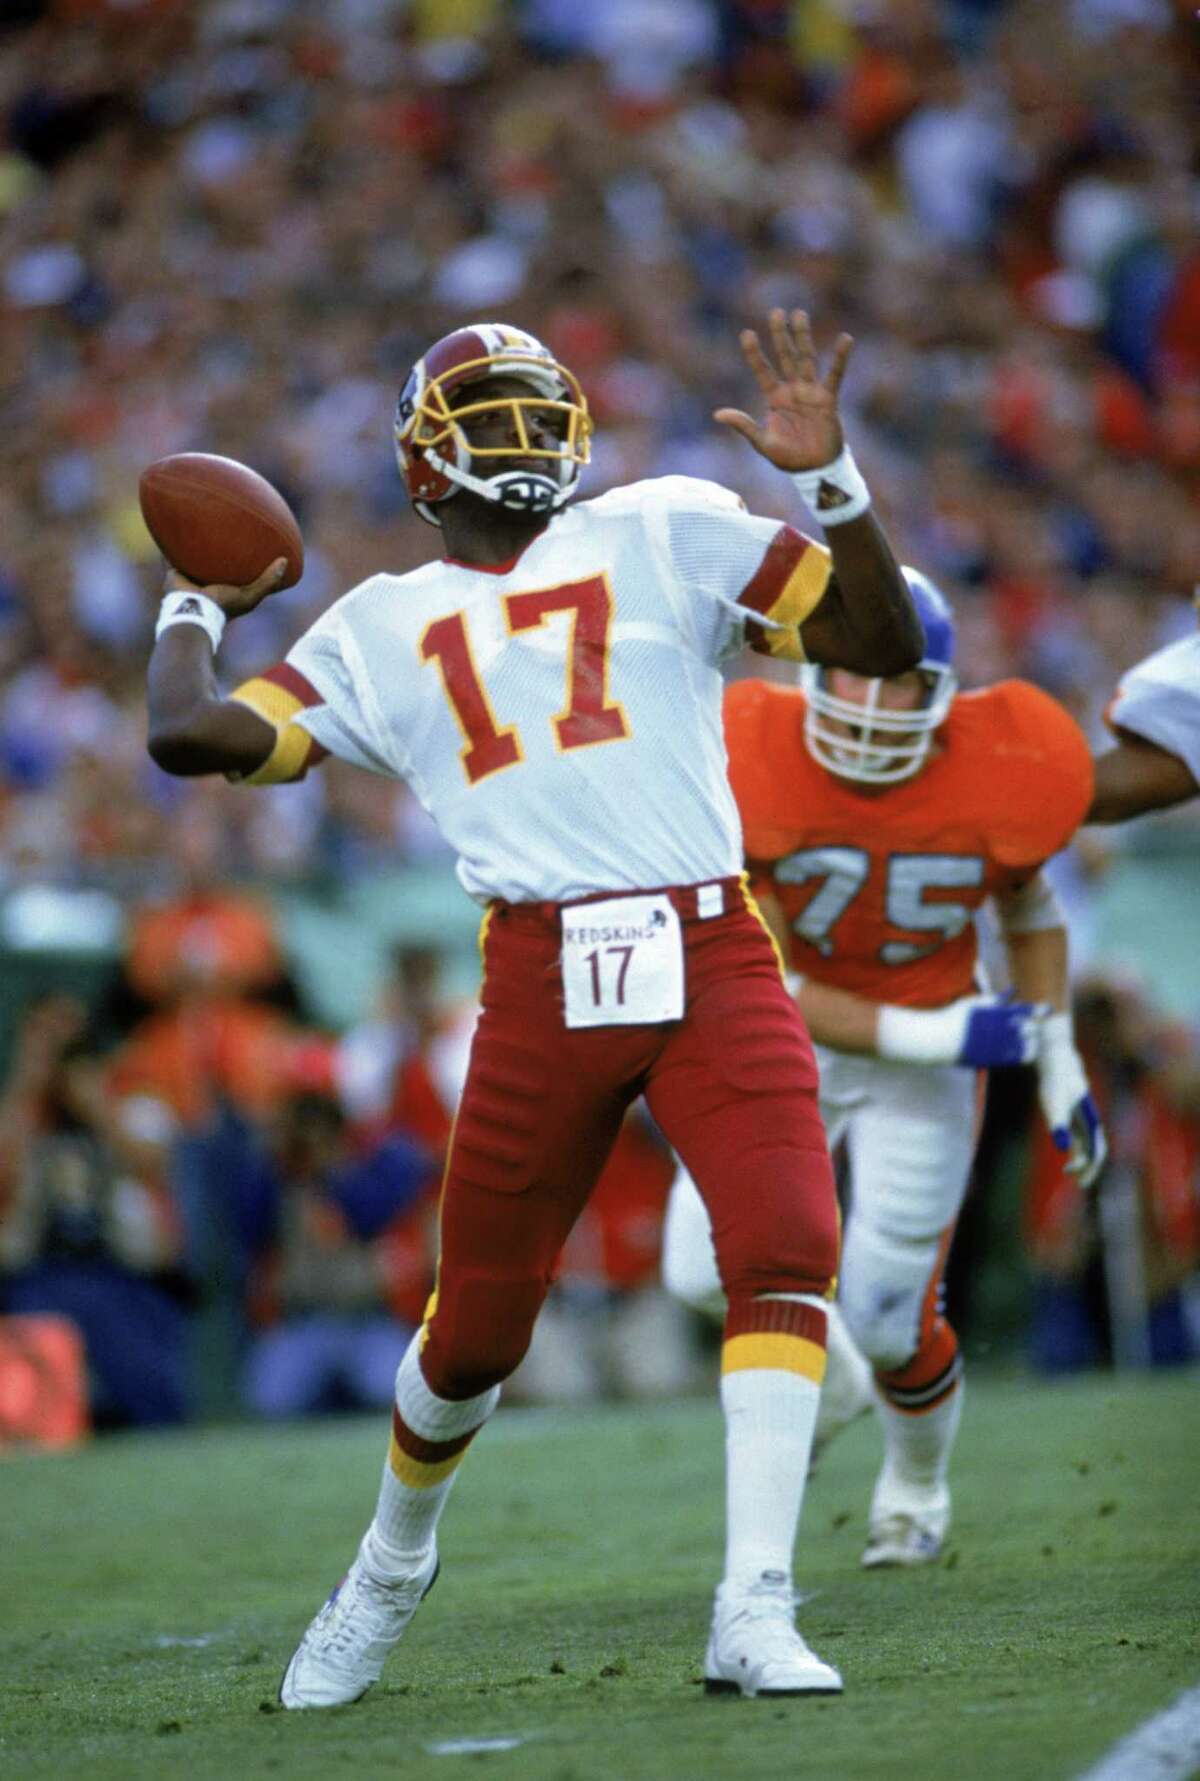 Doug Williams of the Washington Redskins throws a pass against the Denver Bronces during Super Bowl XXII at Jack Murphy Stadium on Jan. 31, 1988 in San Diego. The Redskins defeated the Broncos 42-10.